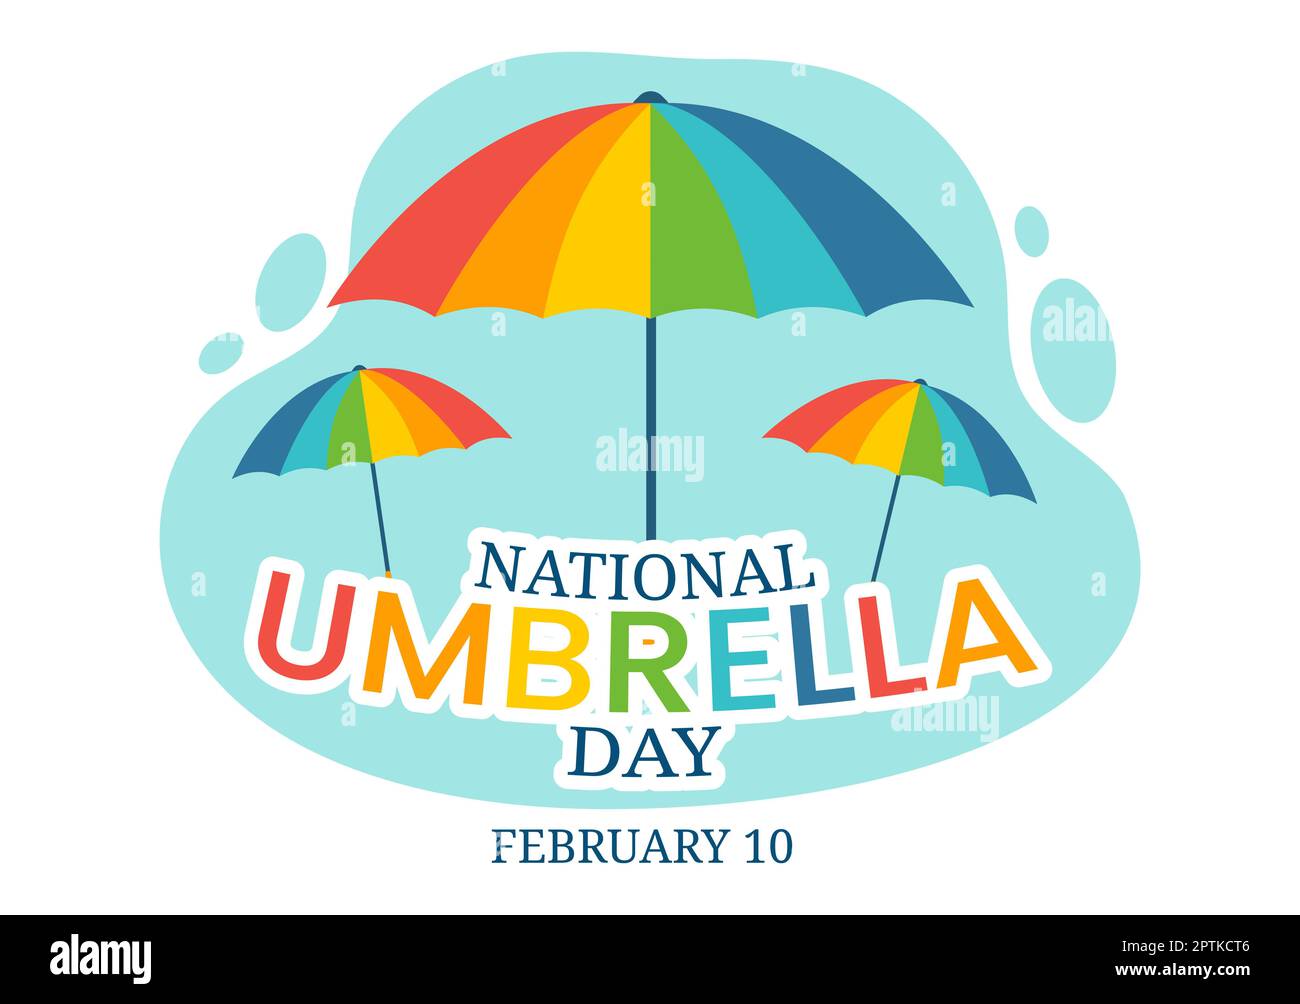 National Umbrella Day Celebration on February 10th to Protect us from